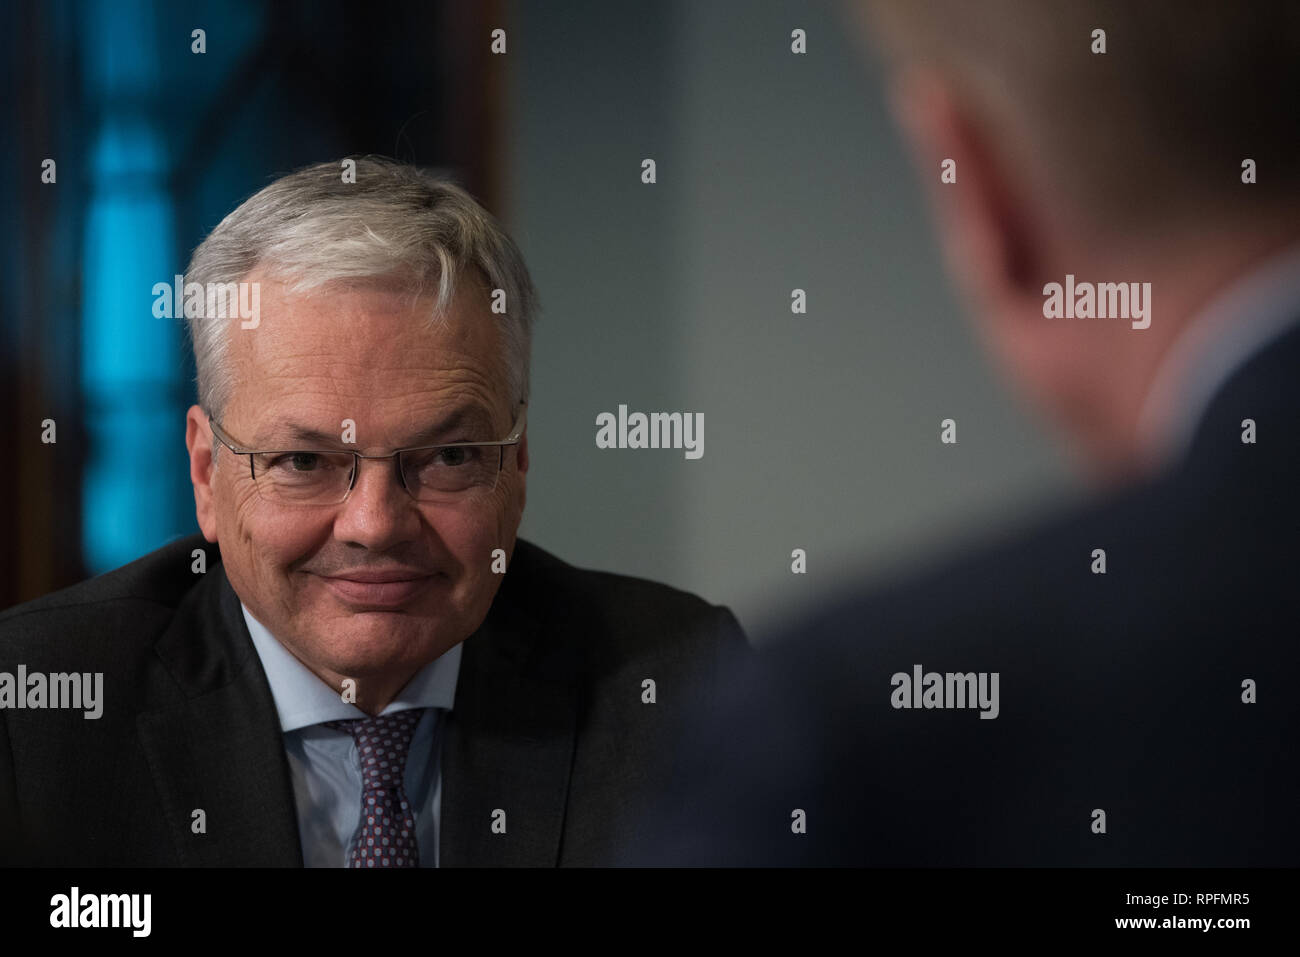 Belgian Minister of Defence Didier Reynders during a meeting with U.S. Acting Secretary of Defense Patrick Shanahan at the Pentagon February 21, 2019 in Arlington, Virginia. Stock Photo